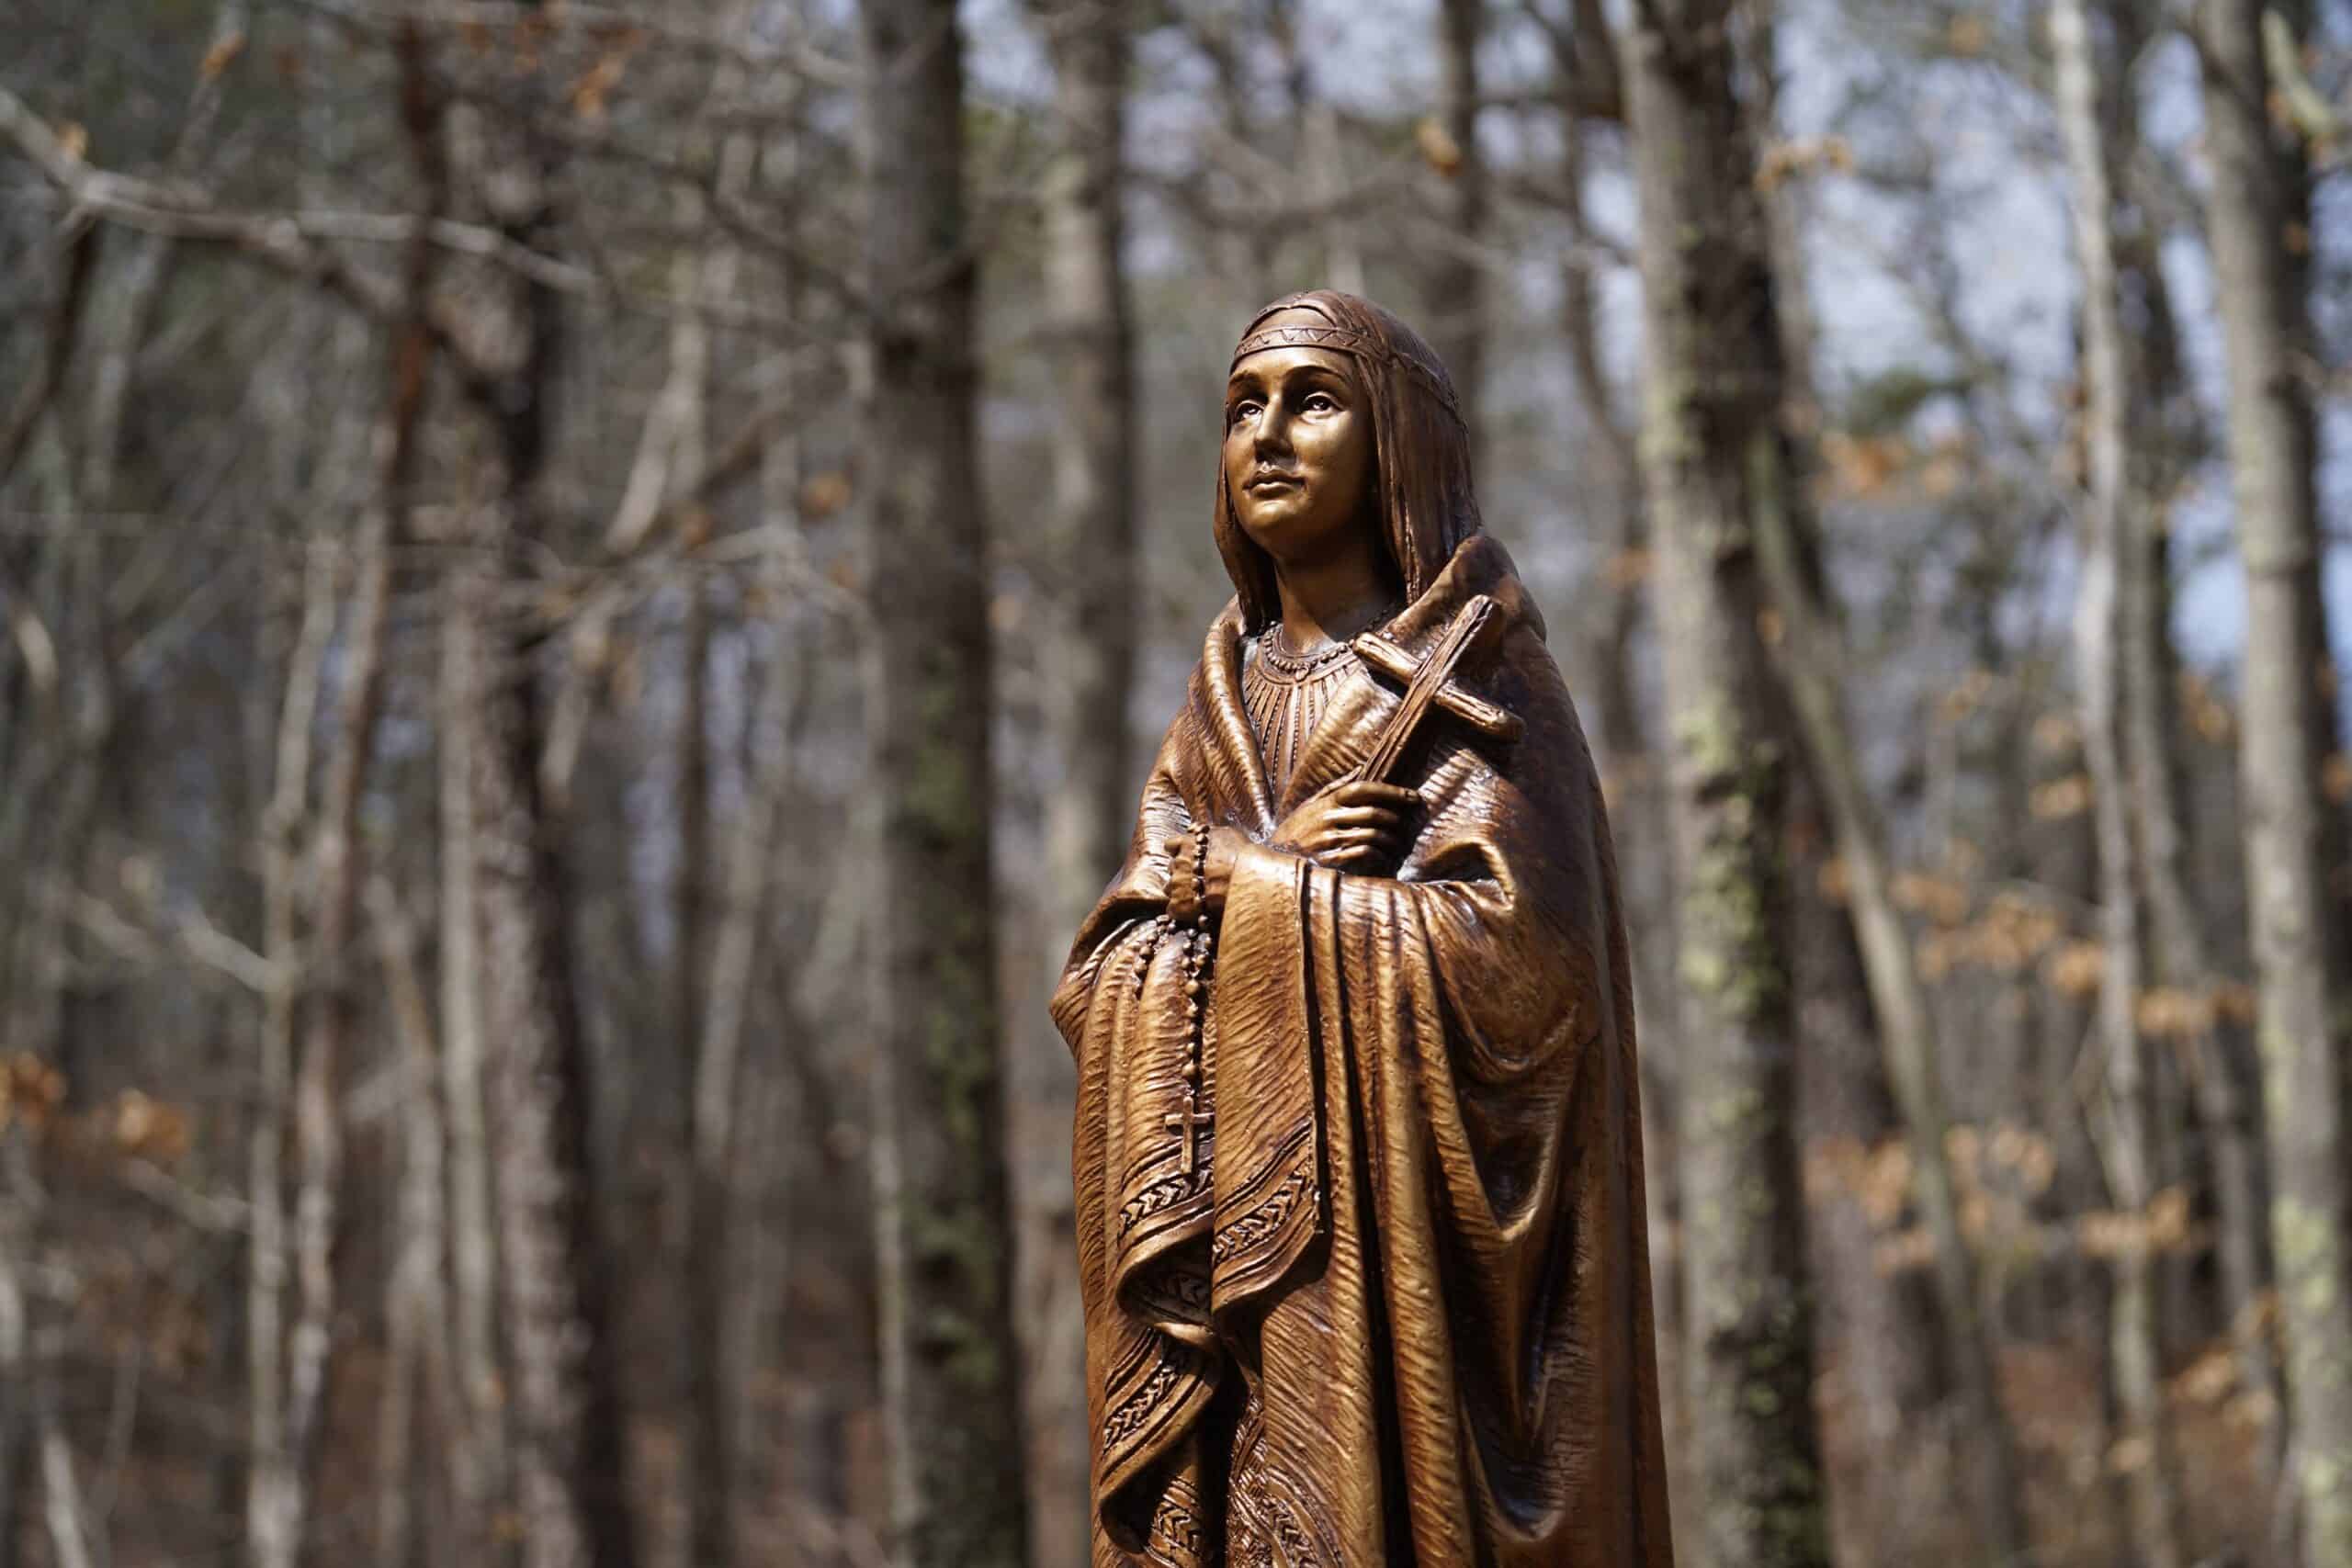 A statue of St. Kateri Tekakwitha, the first Native American to be canonized, is seen at Our Lady of the Island Shrine in Manorville, N.Y., March 25, 2021. (CNS photo/Gregory A. Shemitz)